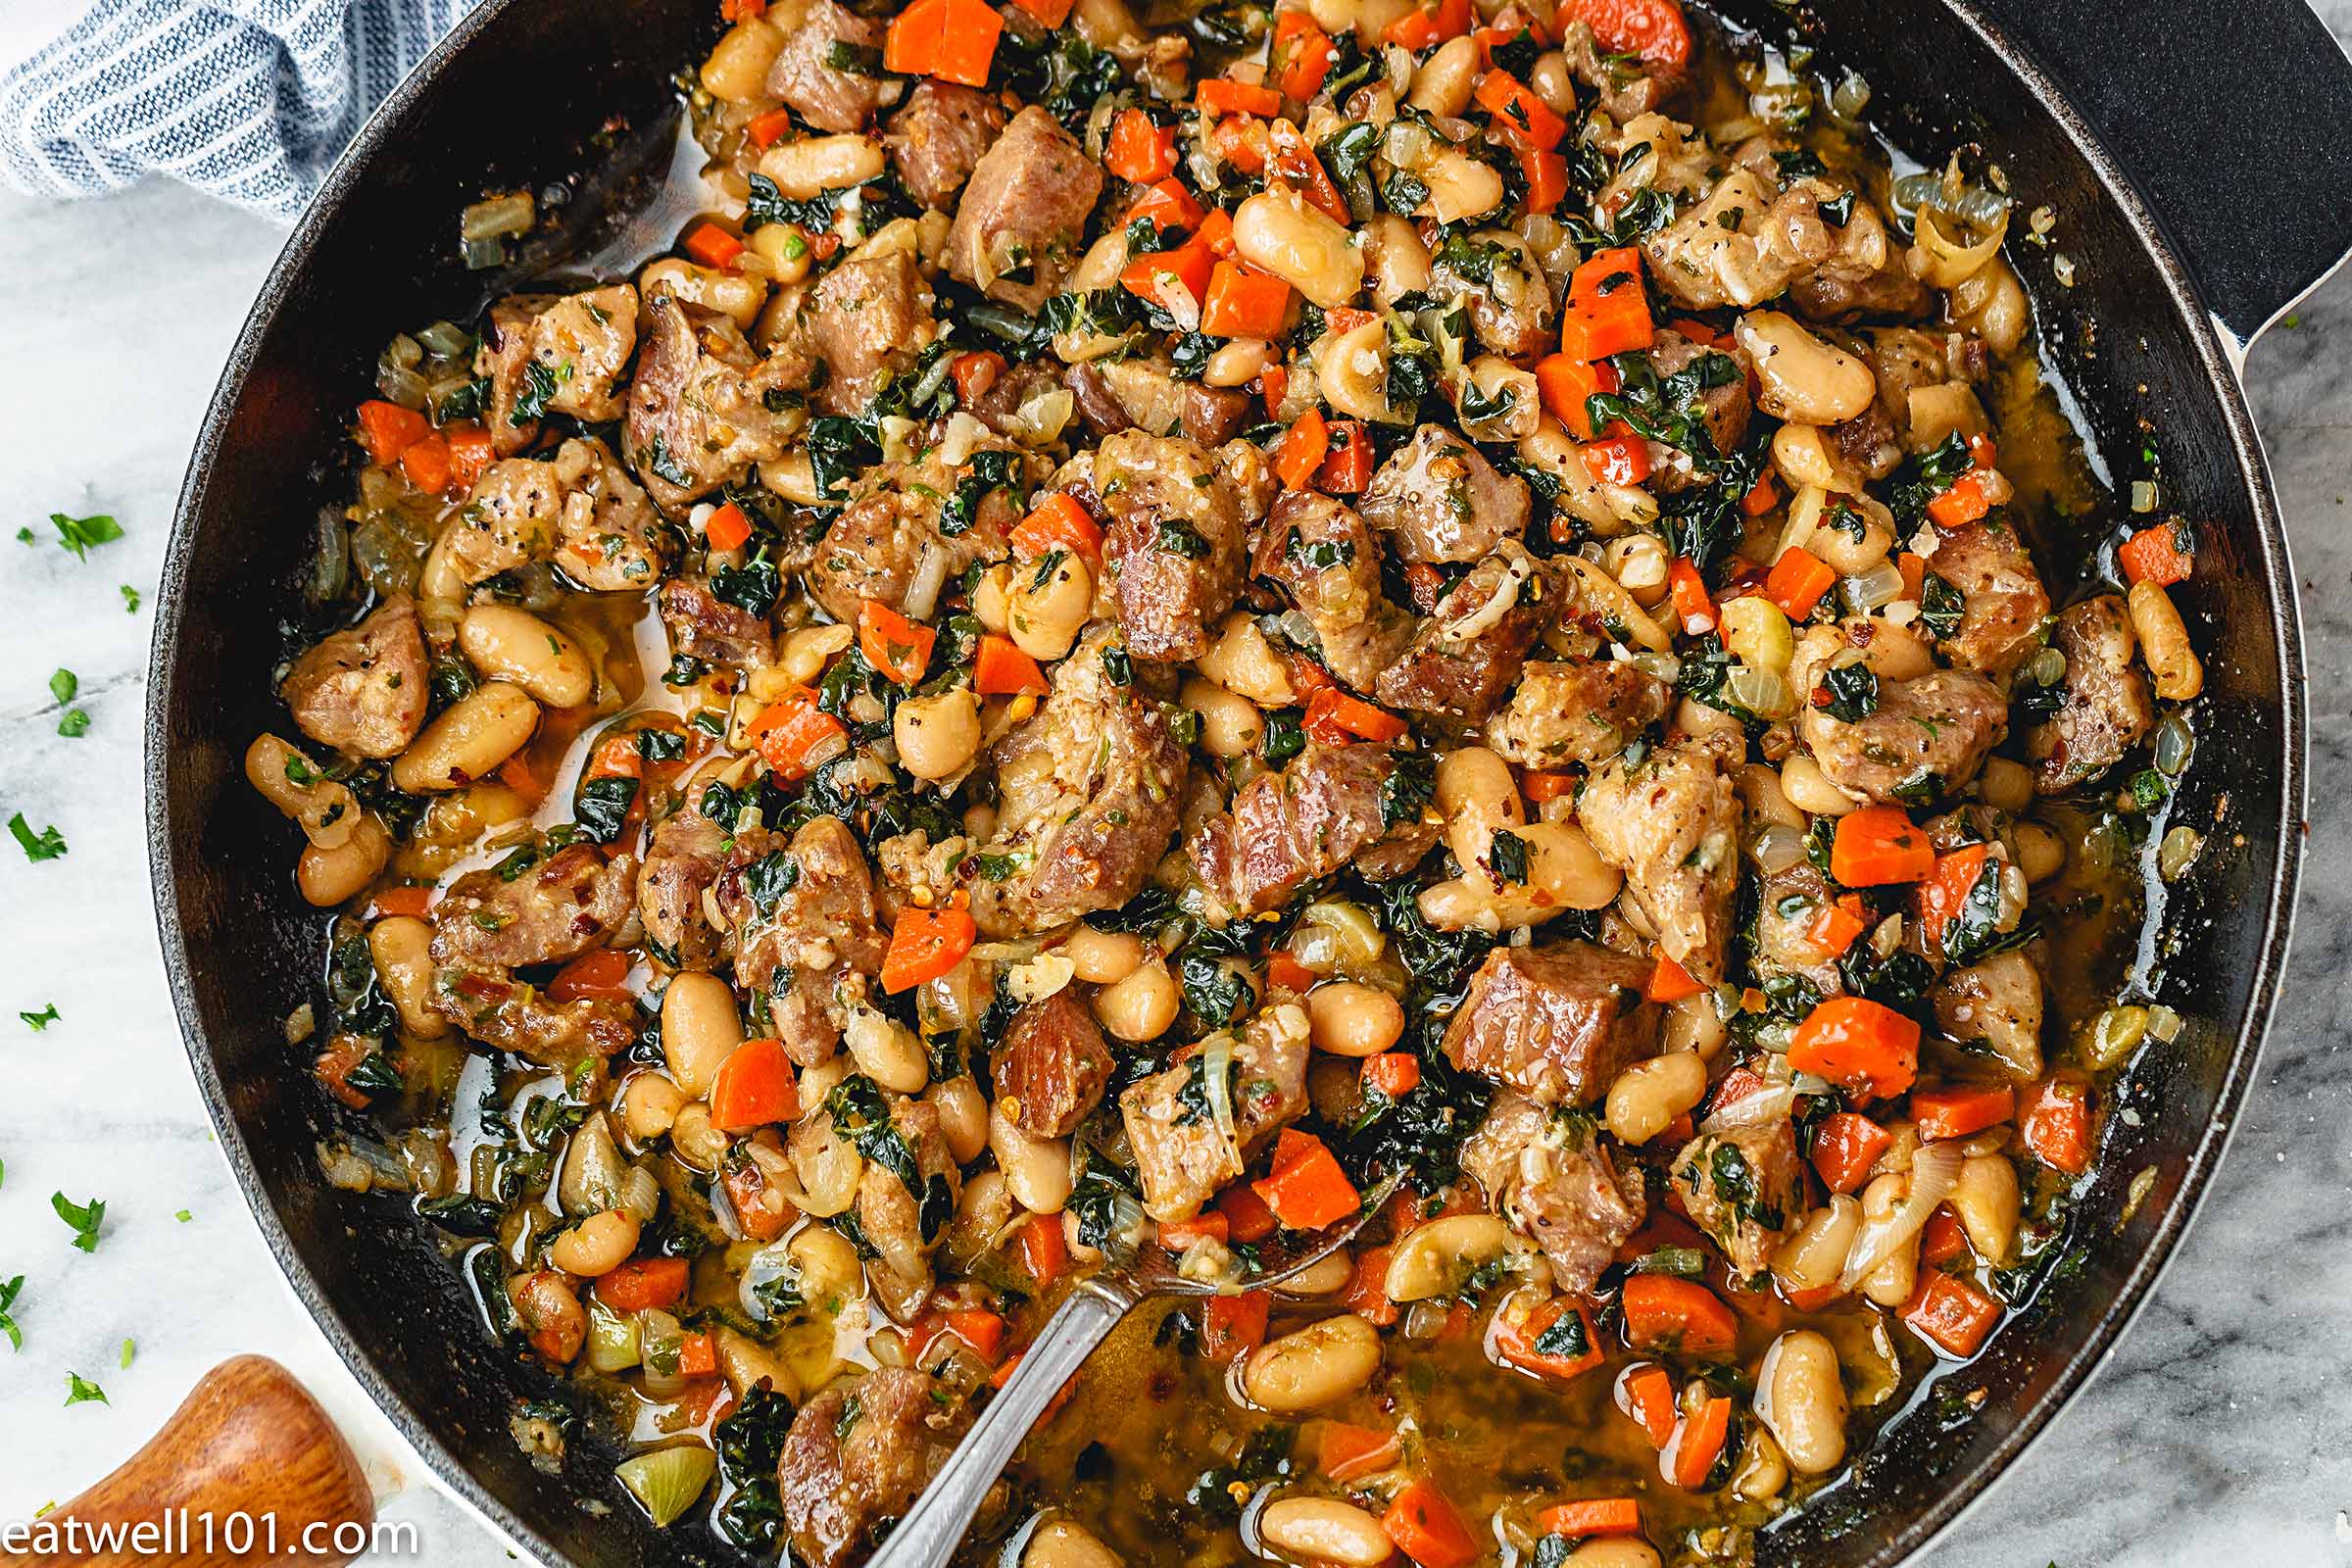 Braised Pork with Kale and Beans